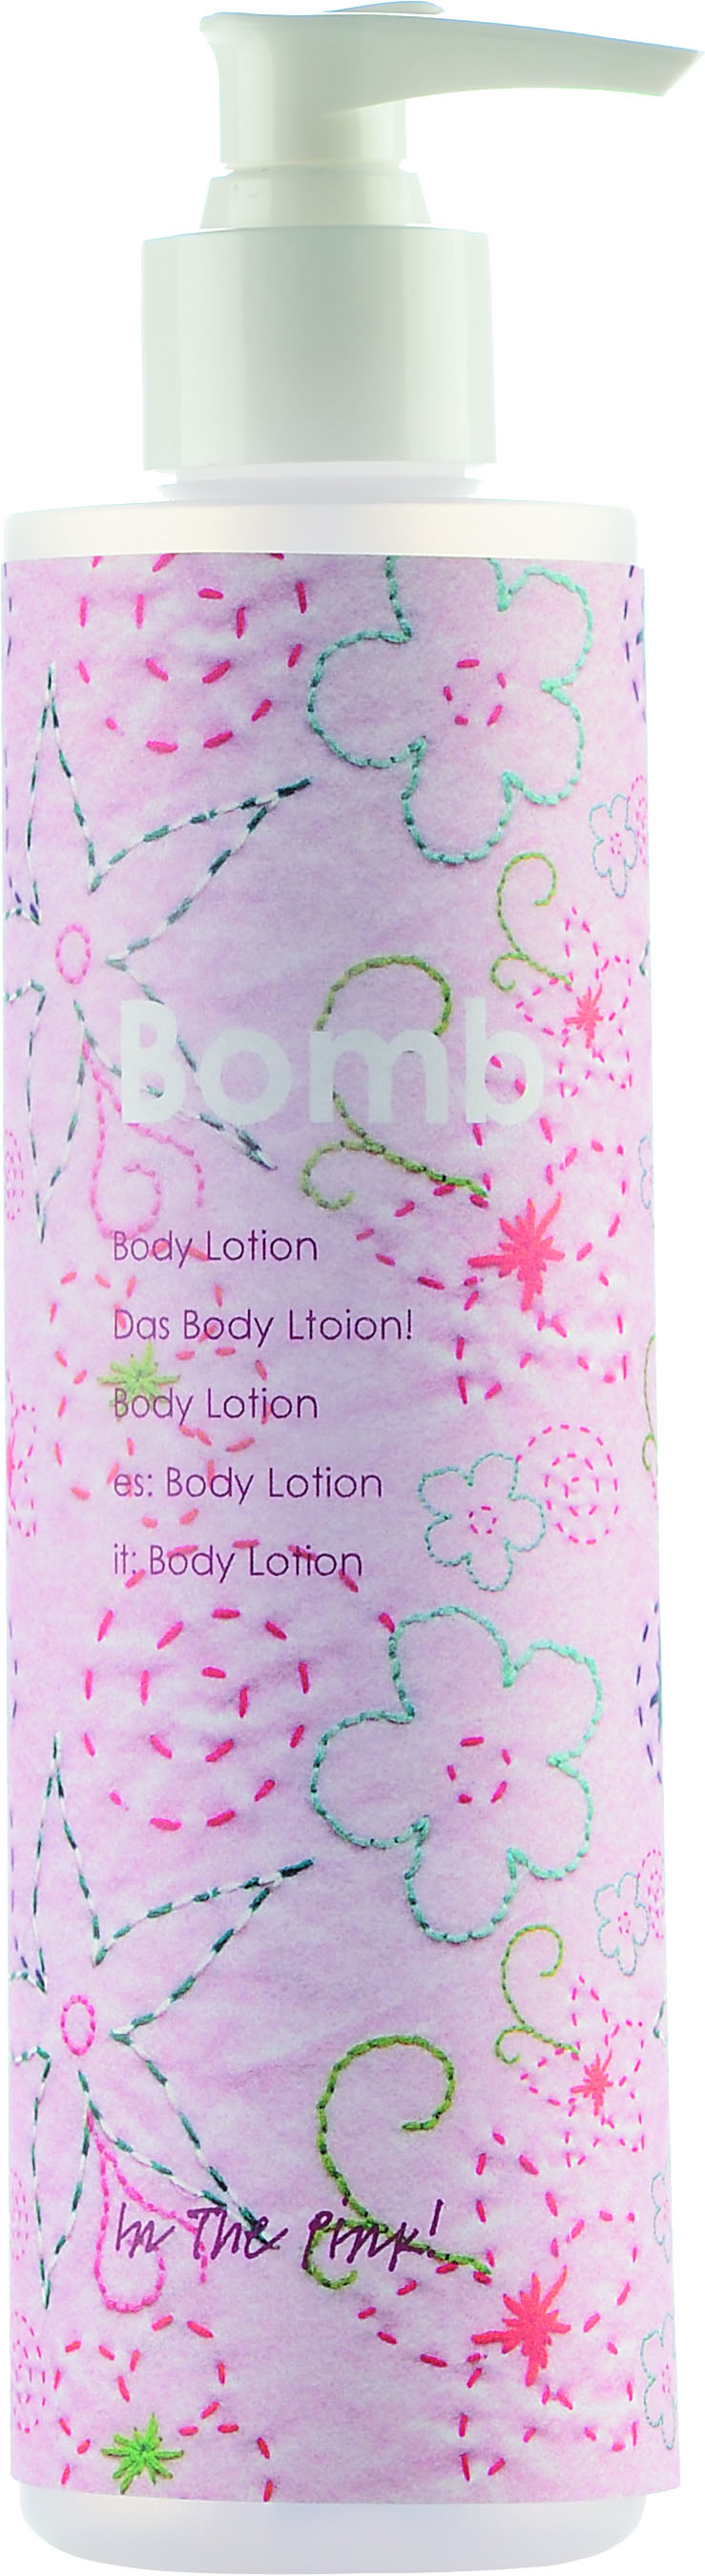 bomb_in the pink lotion.jpg